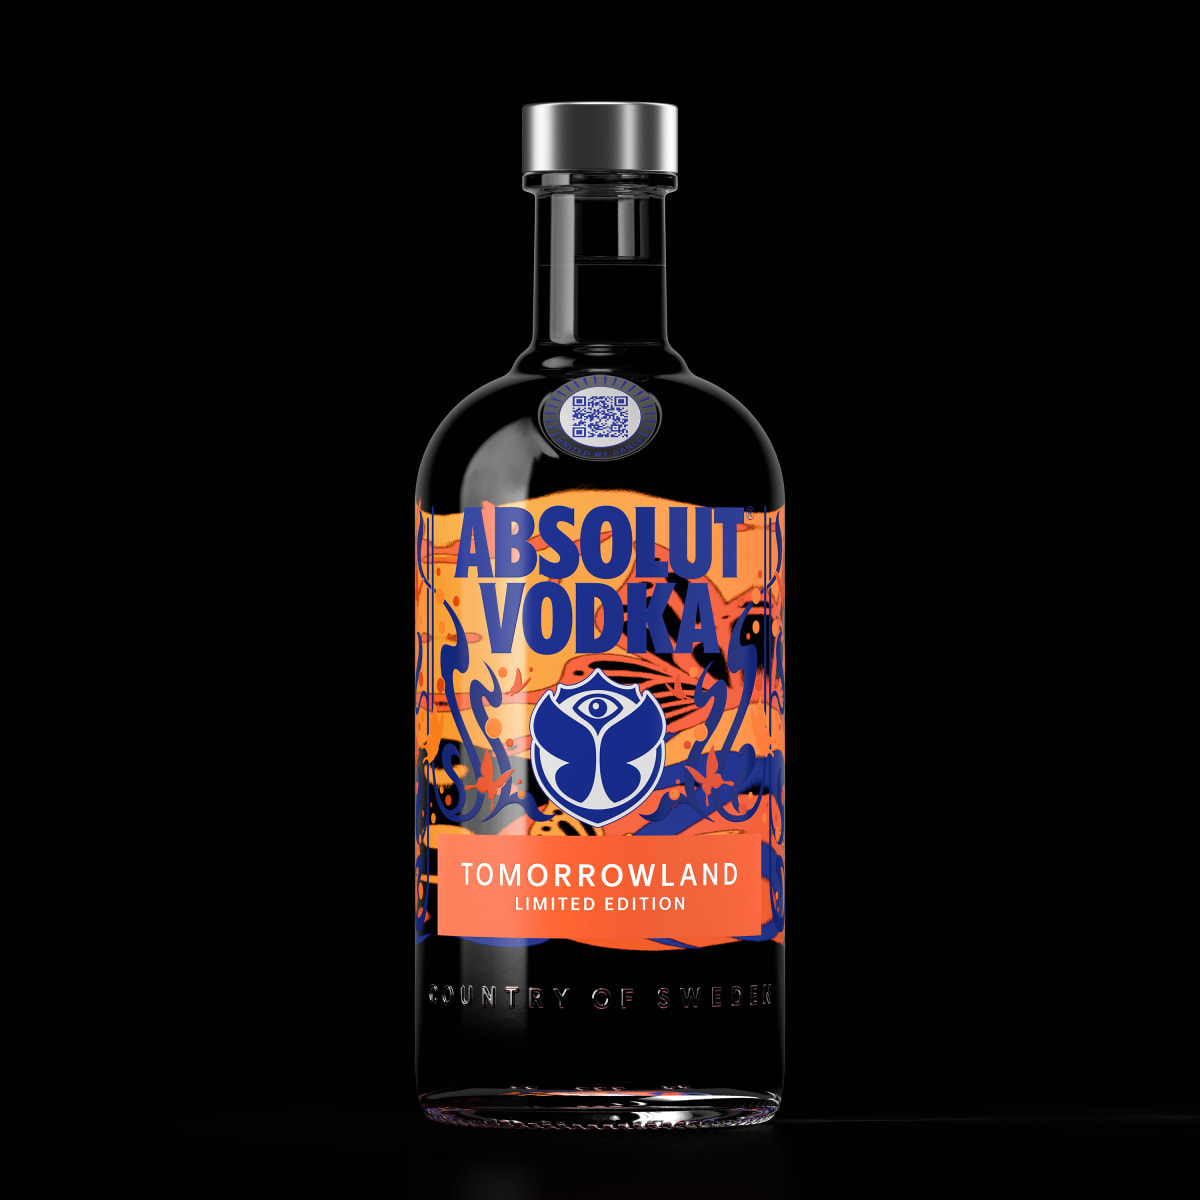 Absolut Limited Edition. Absolut Limited Edition Gold. Голландская водкамедия. I absolute. Absolute x